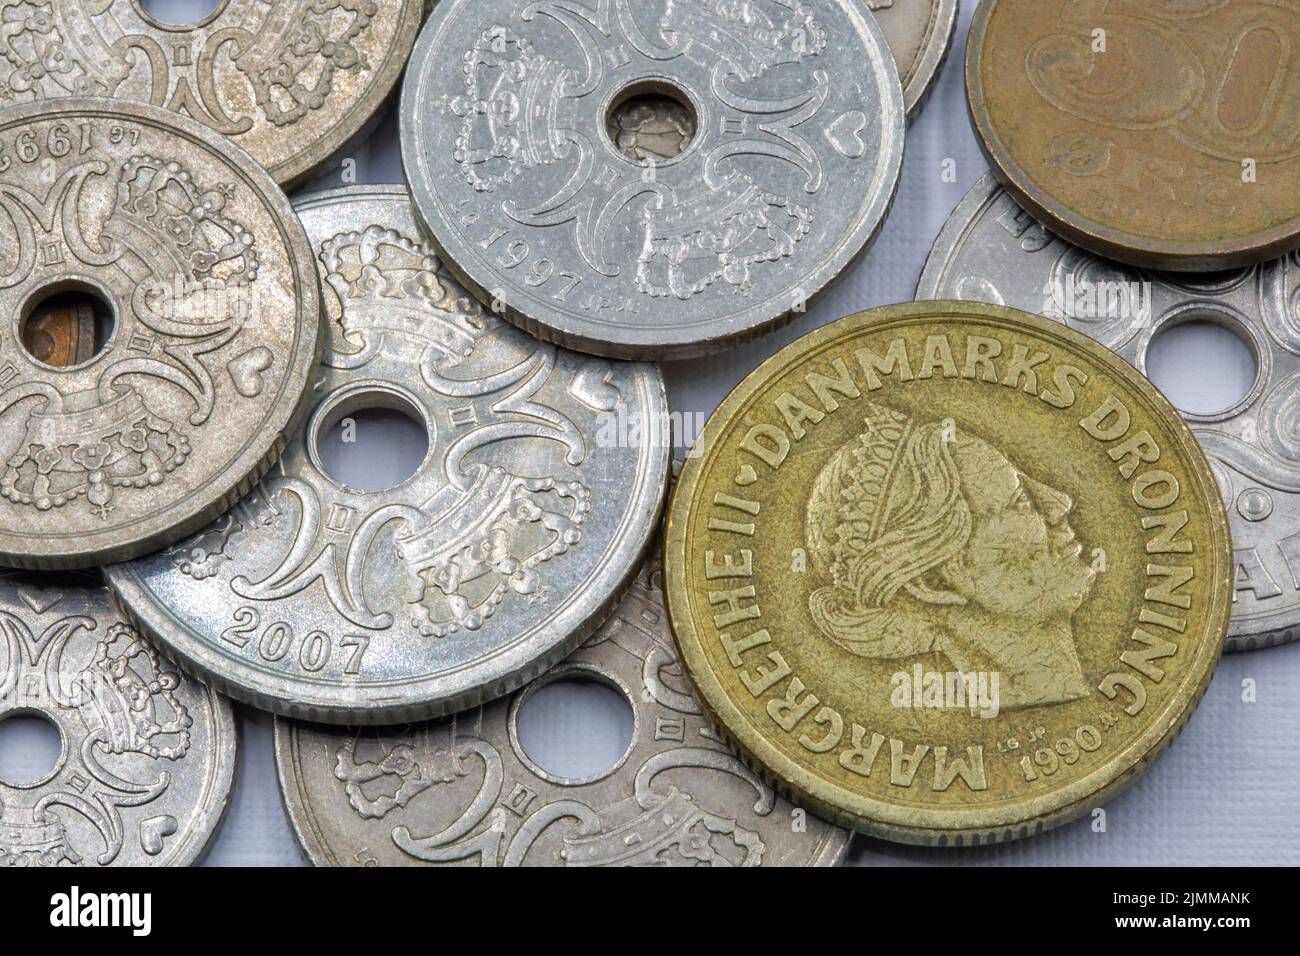 Danish krone coins closeup on white. The krone is the official currency of Denmark, Greenland, and the Faroe Islands, introduced on 1 January 1875. Stock Photo